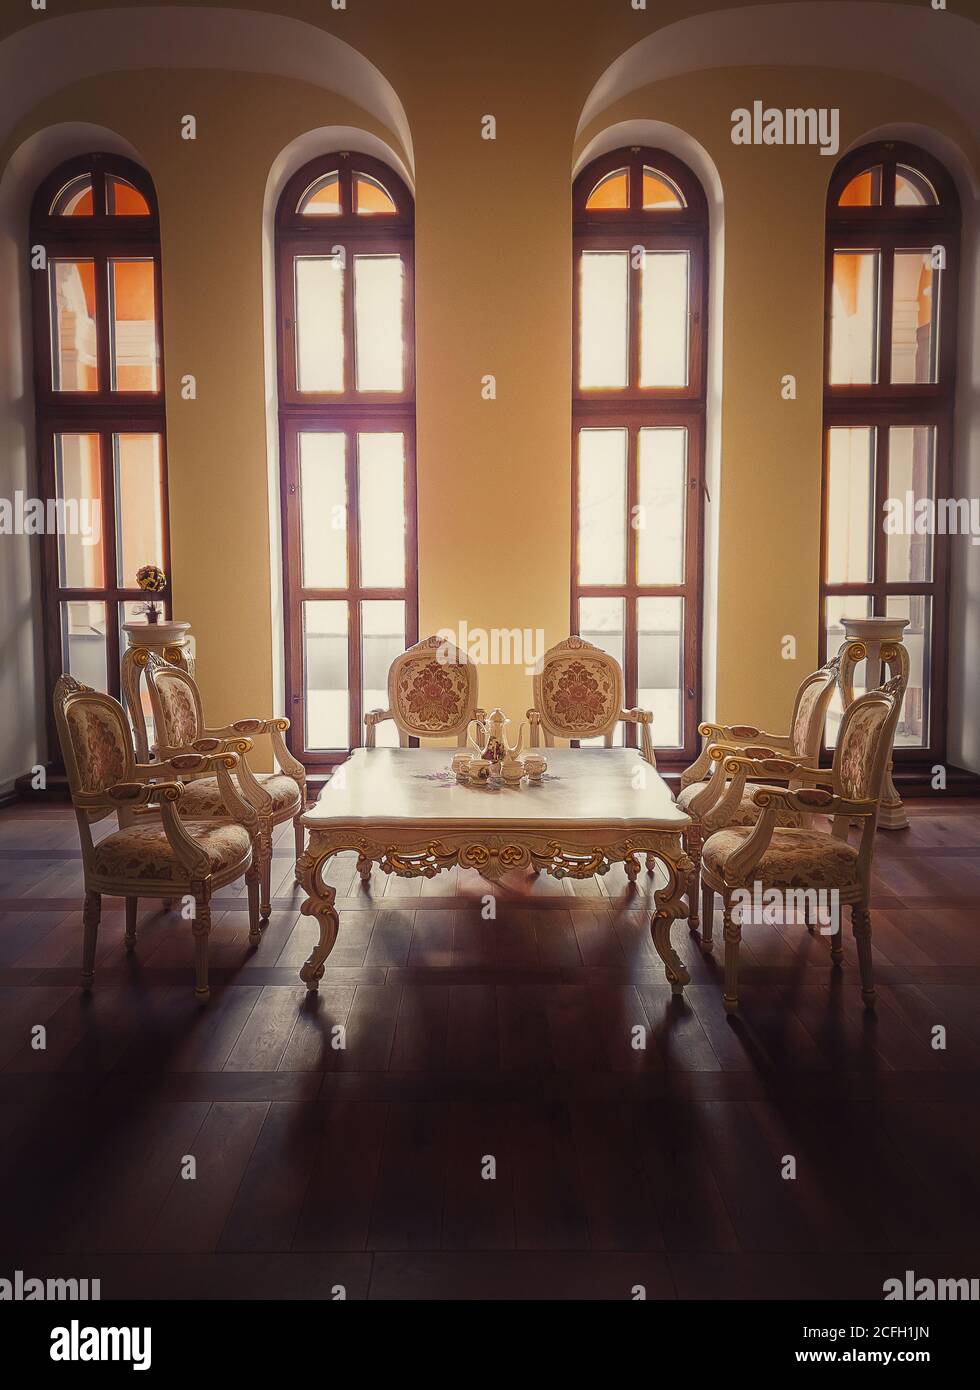 Ancient royalty dining room, medieval furniture style with golden ornate  chairs and table near the arched windows. Luxury hosting room background,  old Stock Photo - Alamy